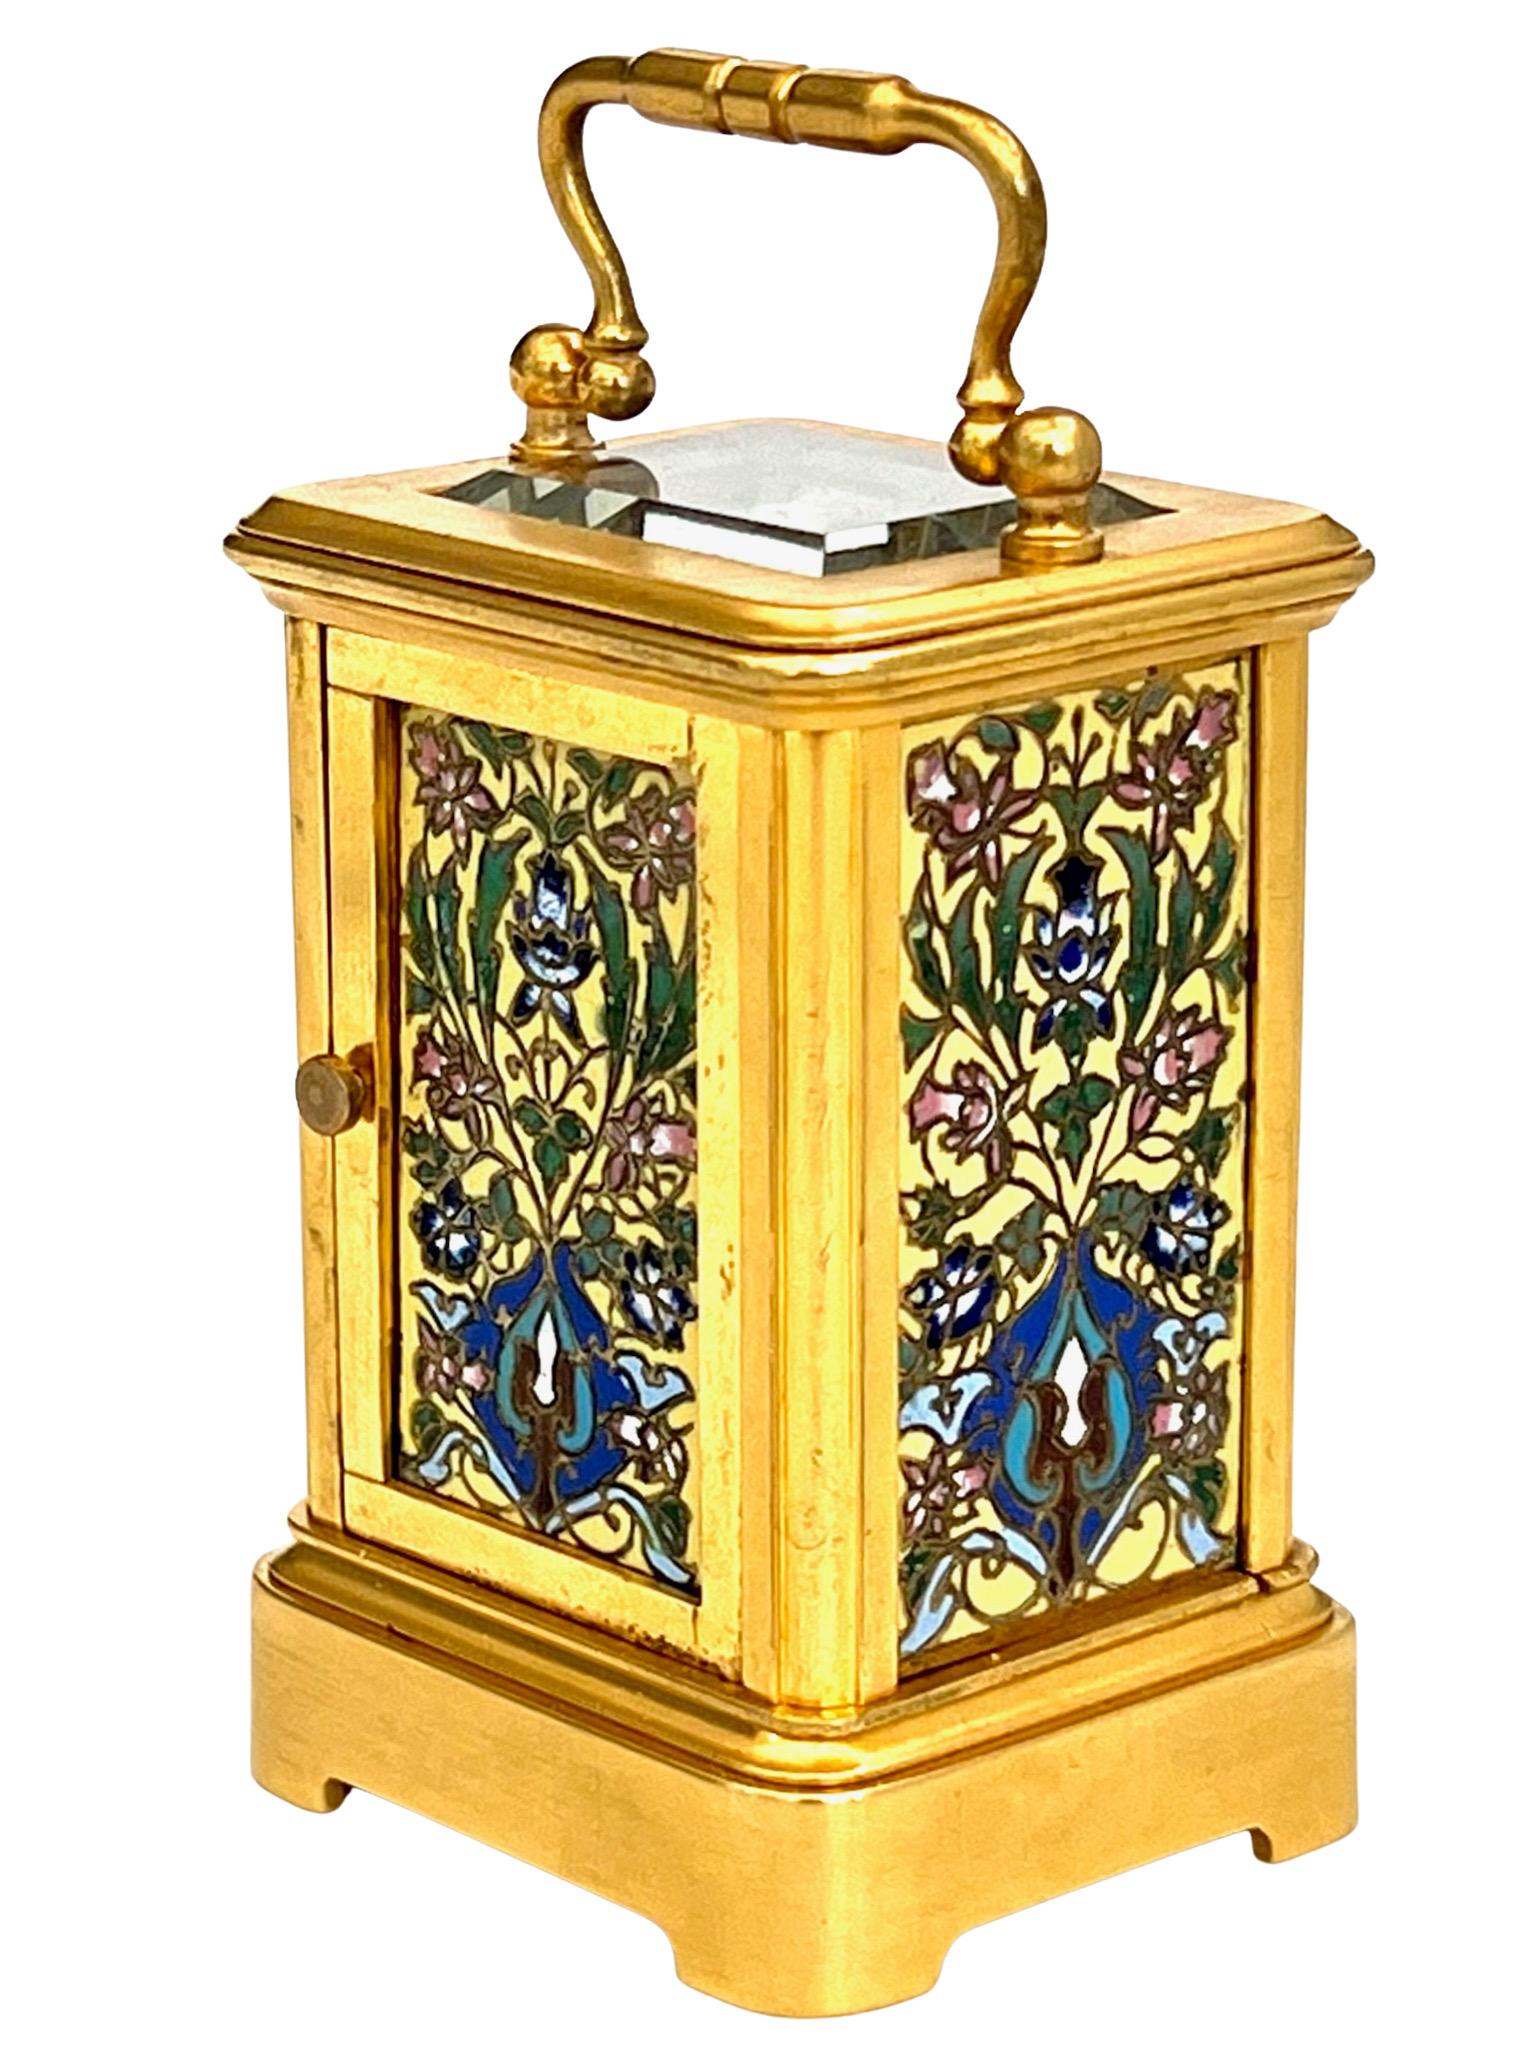 Late 19th Century French Miniature Timepiece 8 Day Carriage Clock With Champlevé Enamel Panels For Sale